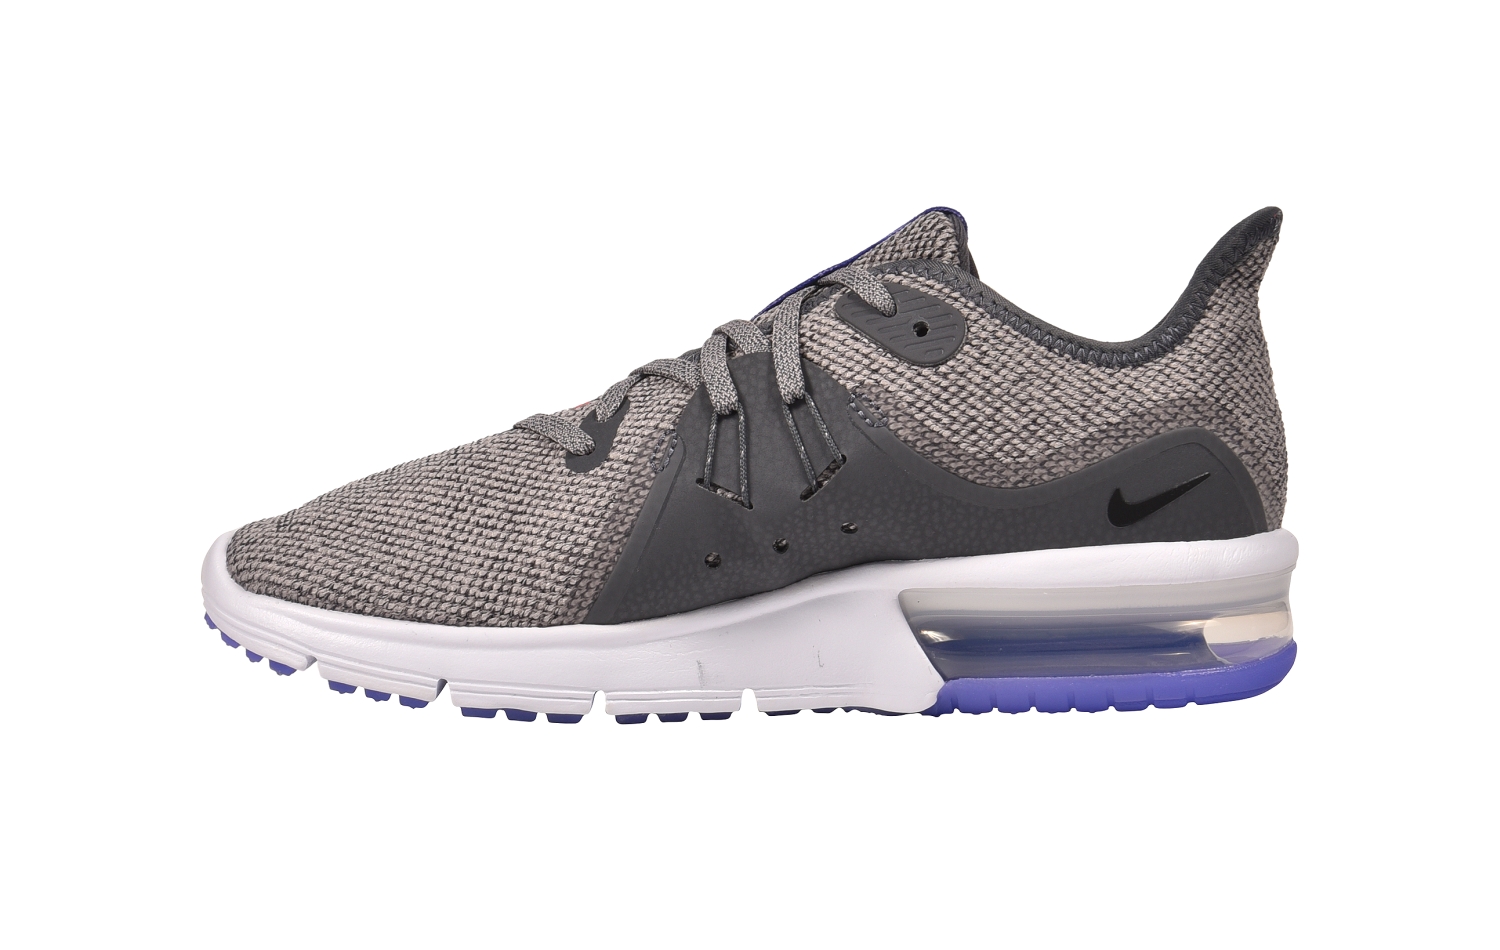 Nike Wmns Air Max Sequent 3 (908993-013)